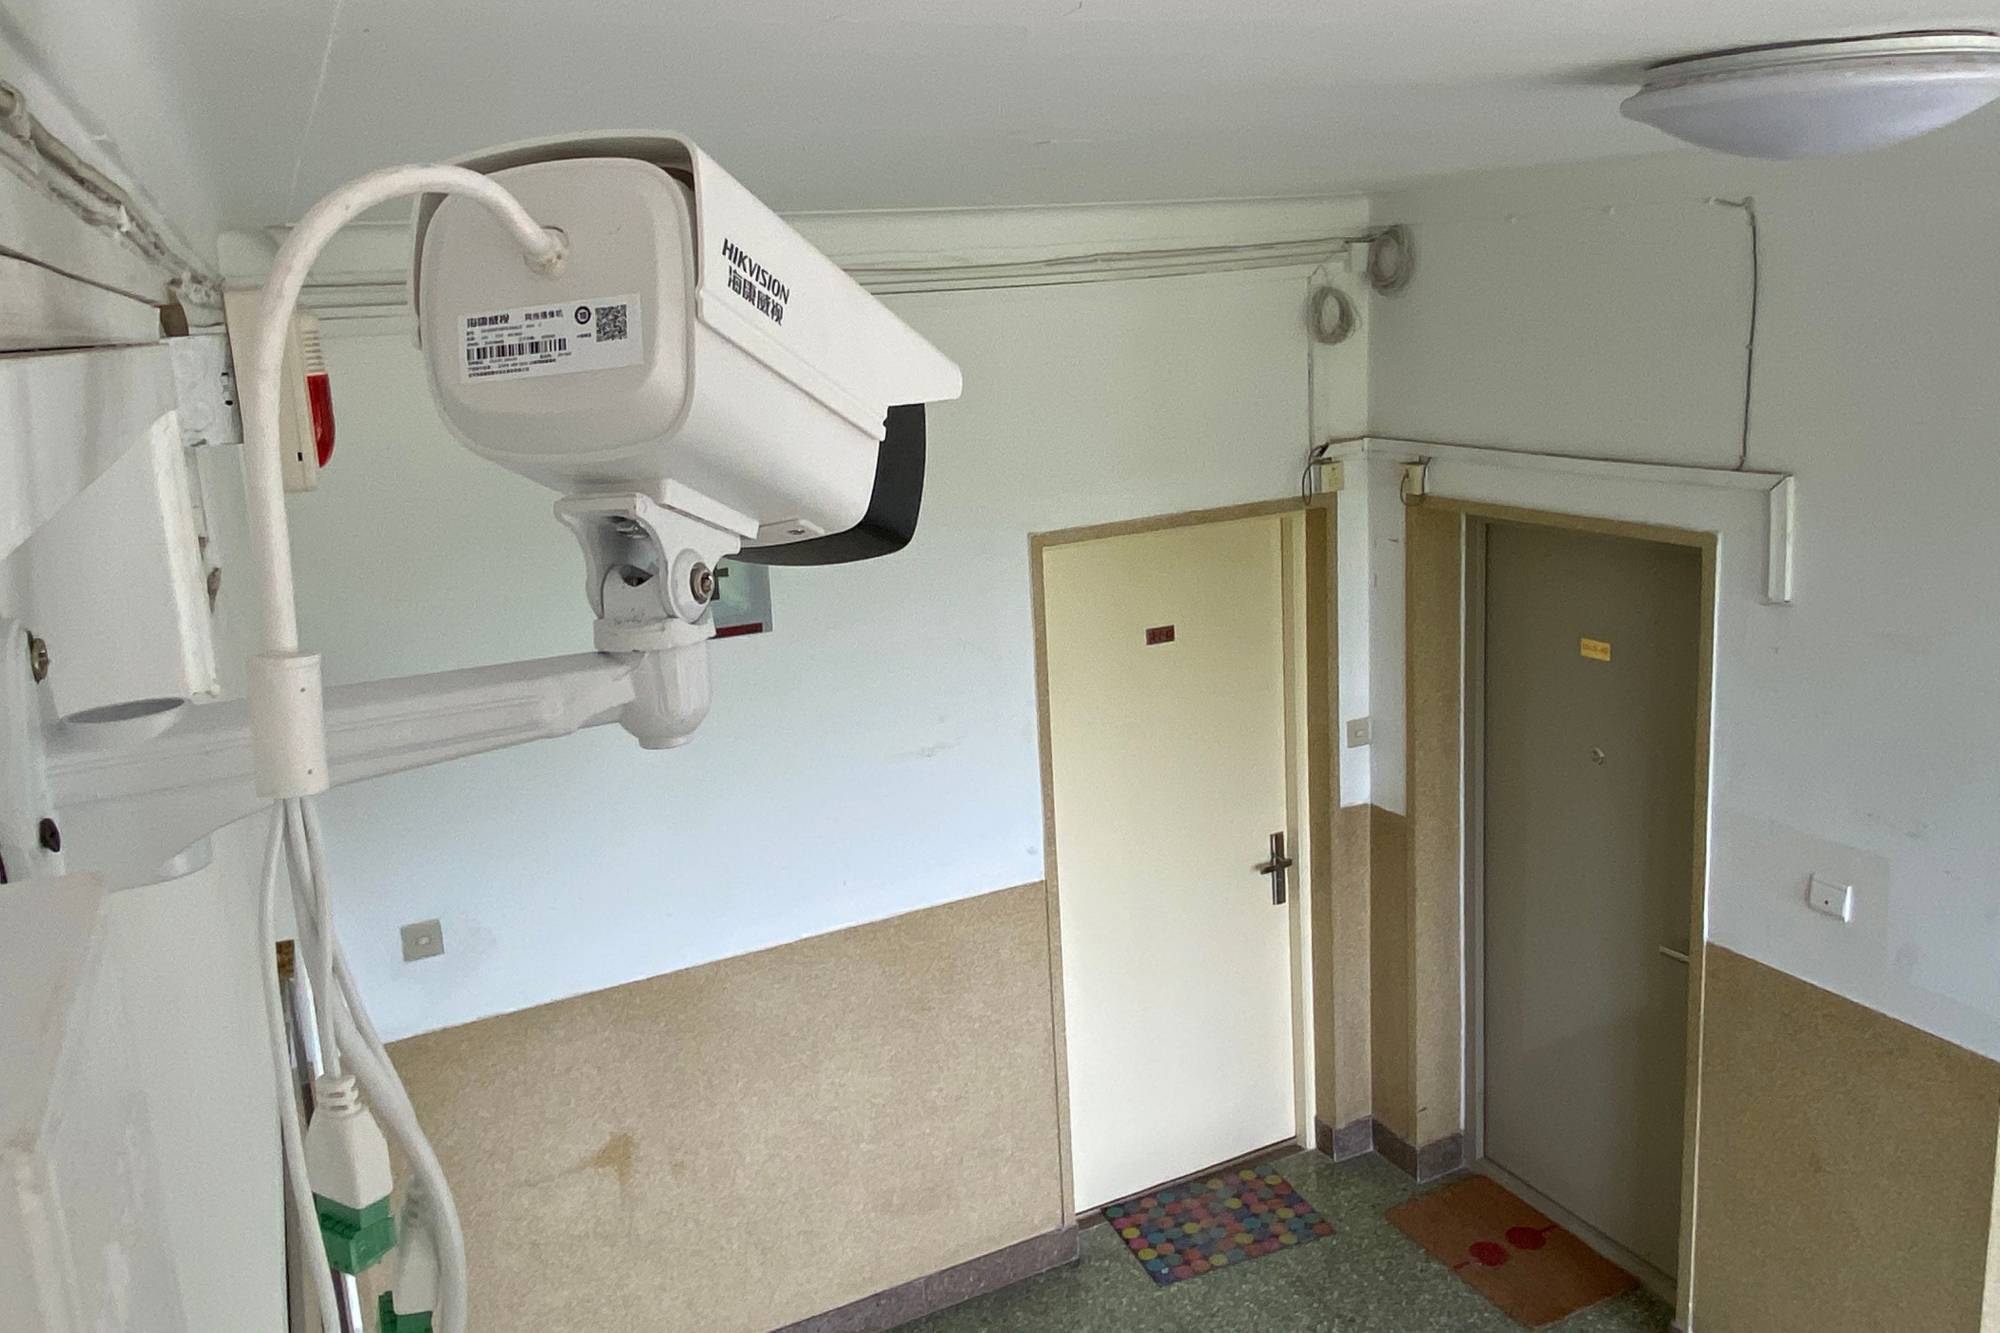 A surveillance camera keeps watch May 3 outside the Beijing home of a journalist who was placed under quarantine after visiting Wuhan.  | AFP-JIJI